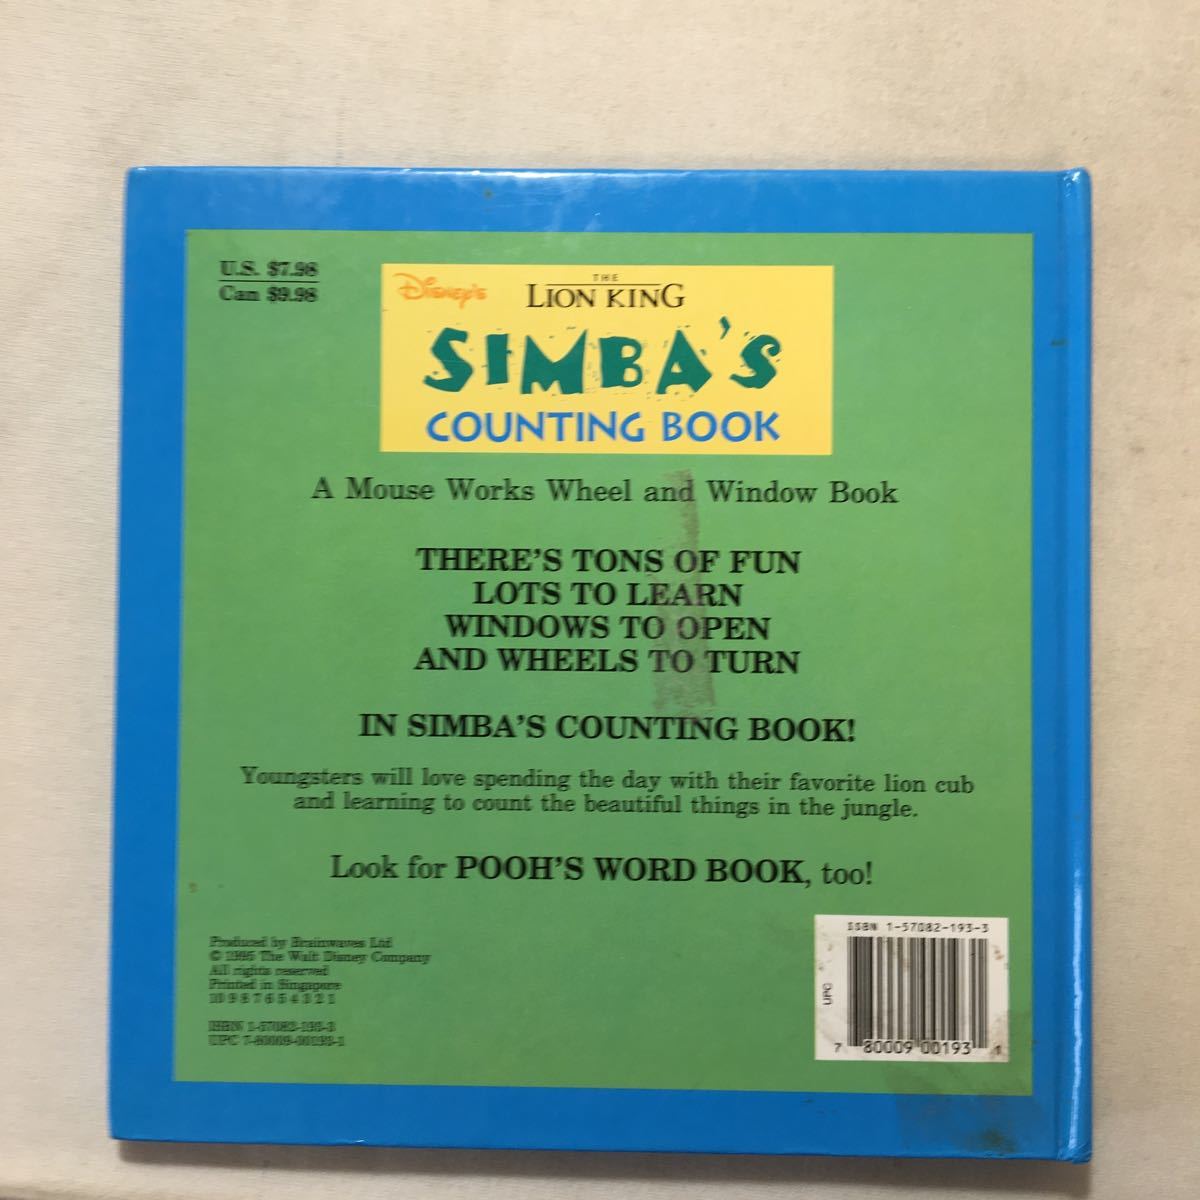 zaa-313♪Disney's the Lion King: Simba's Counting Book ライオンキング(A Mouse Works Wheel and Window Book) 1995/3/1